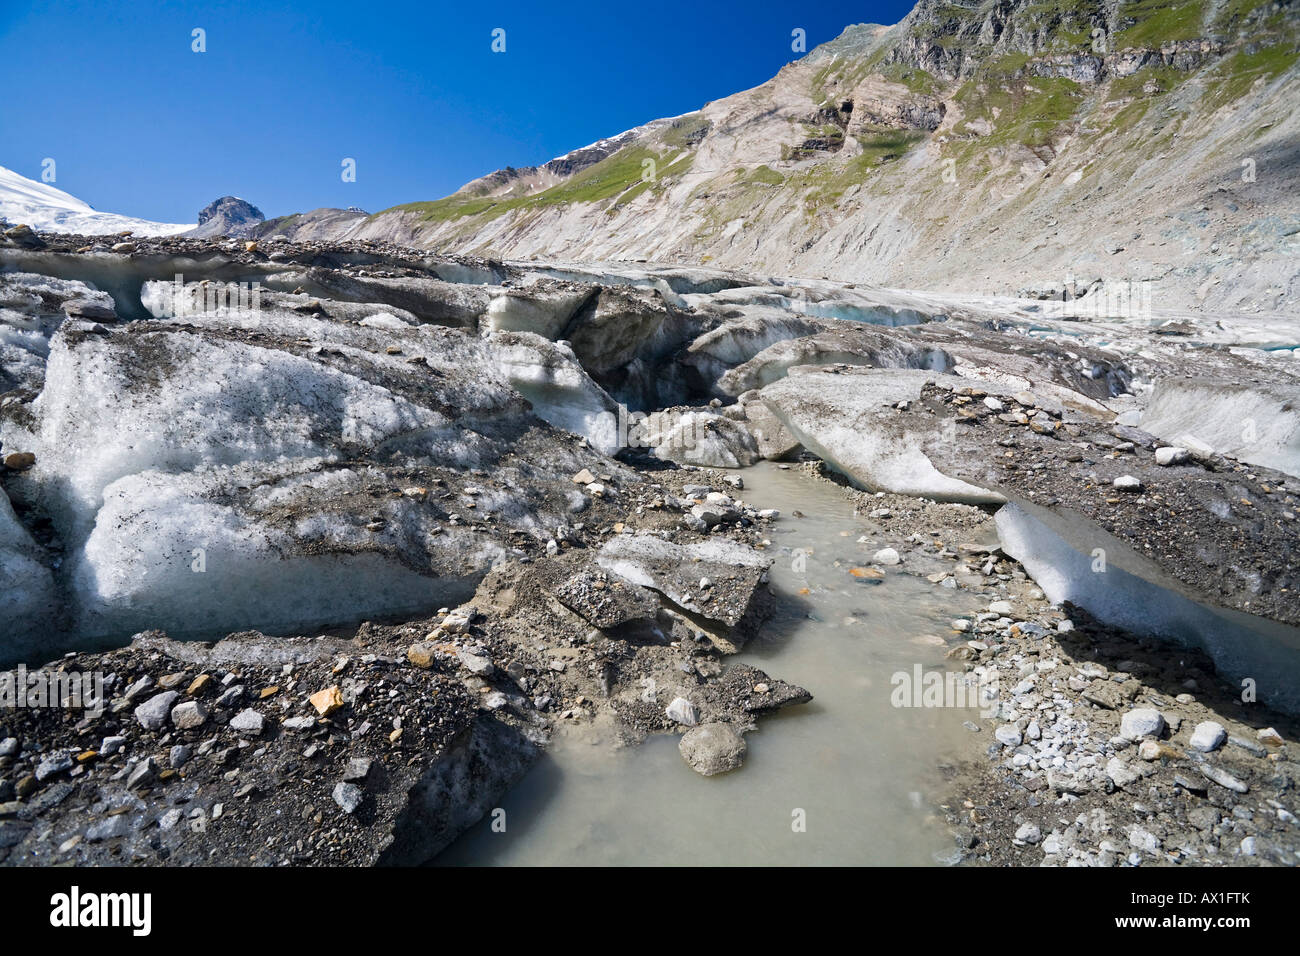 Subglacial stream, englacial streamon from the glacier Pasterze between the Grossglockner mountain group, national park Hohe Ta Stock Photo